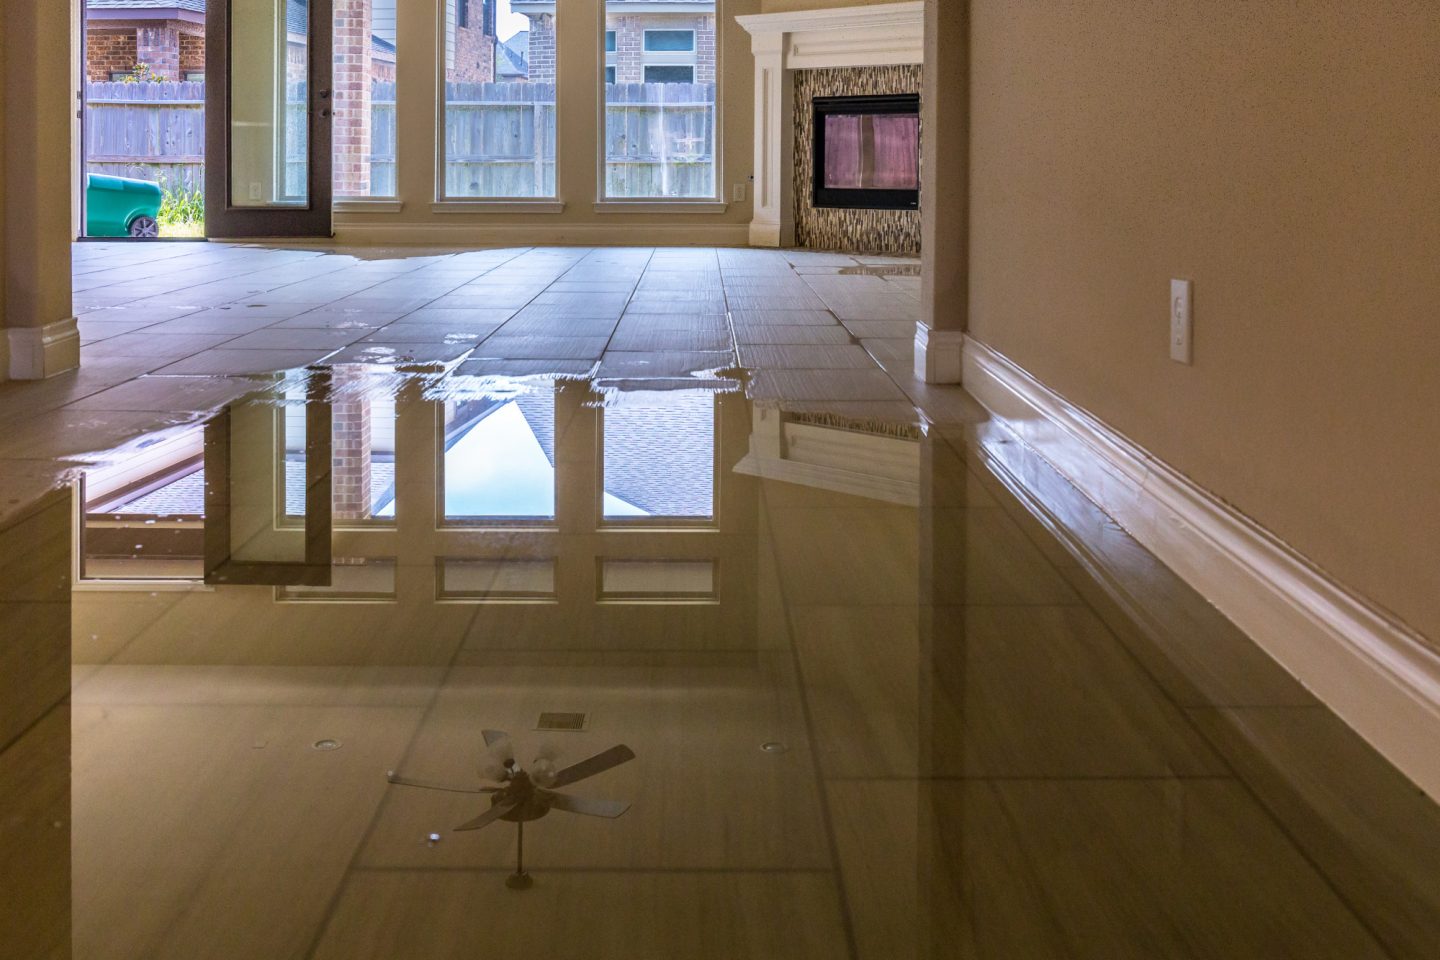 Commercial Water Damage Restoration: Identifying Risks, Remediation Strategies, and Preventive Measures